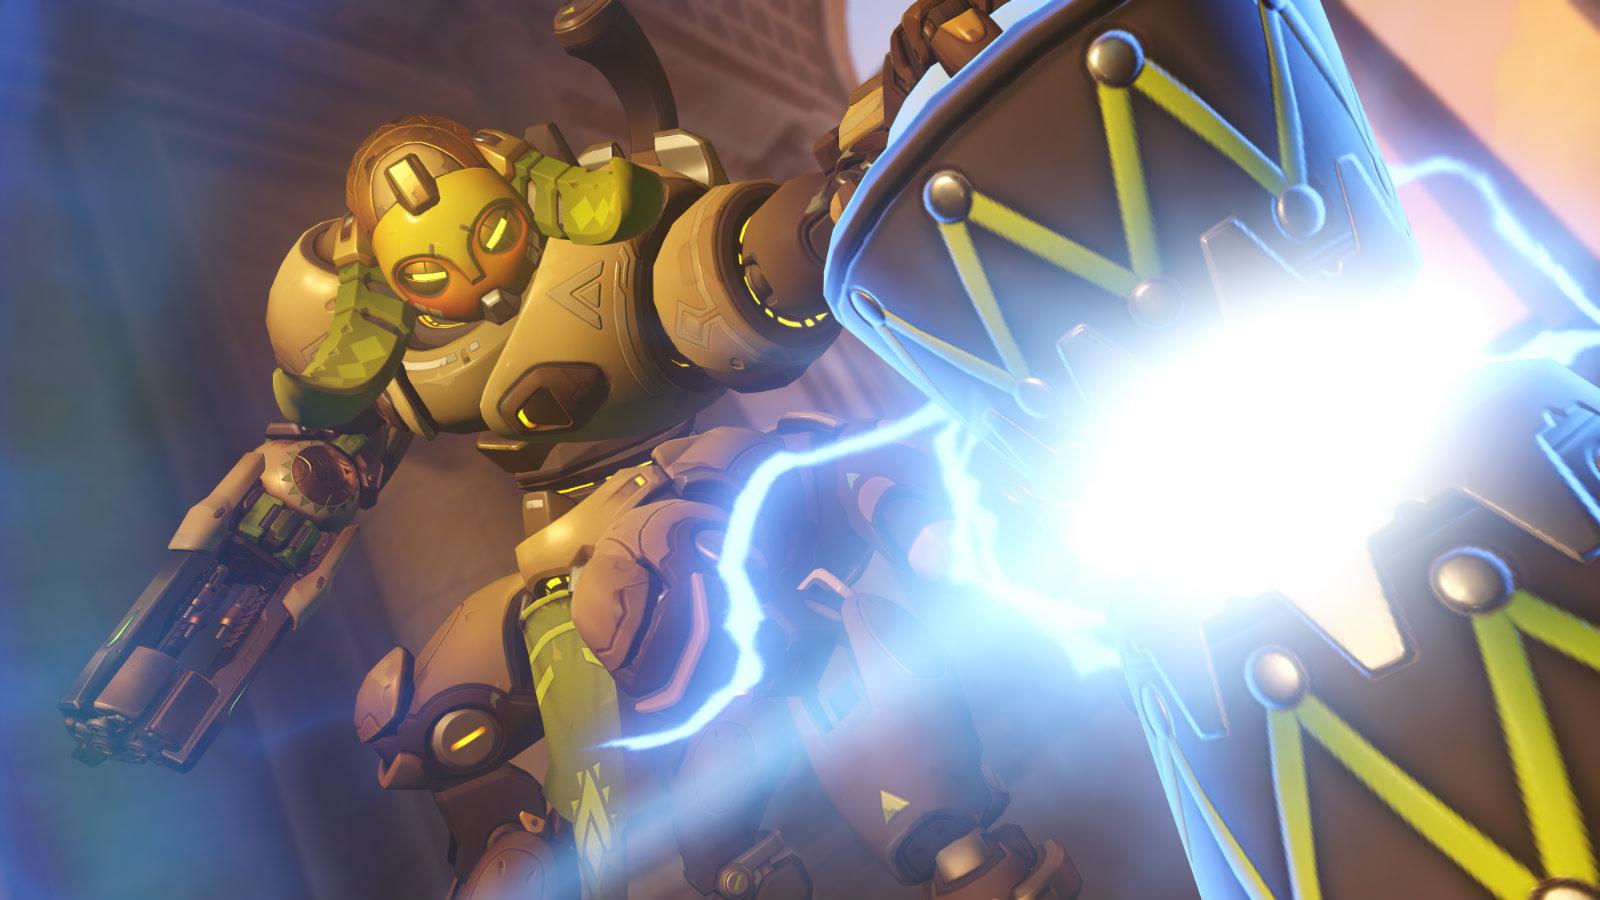 Orisa places down Super Charger in Overwatch